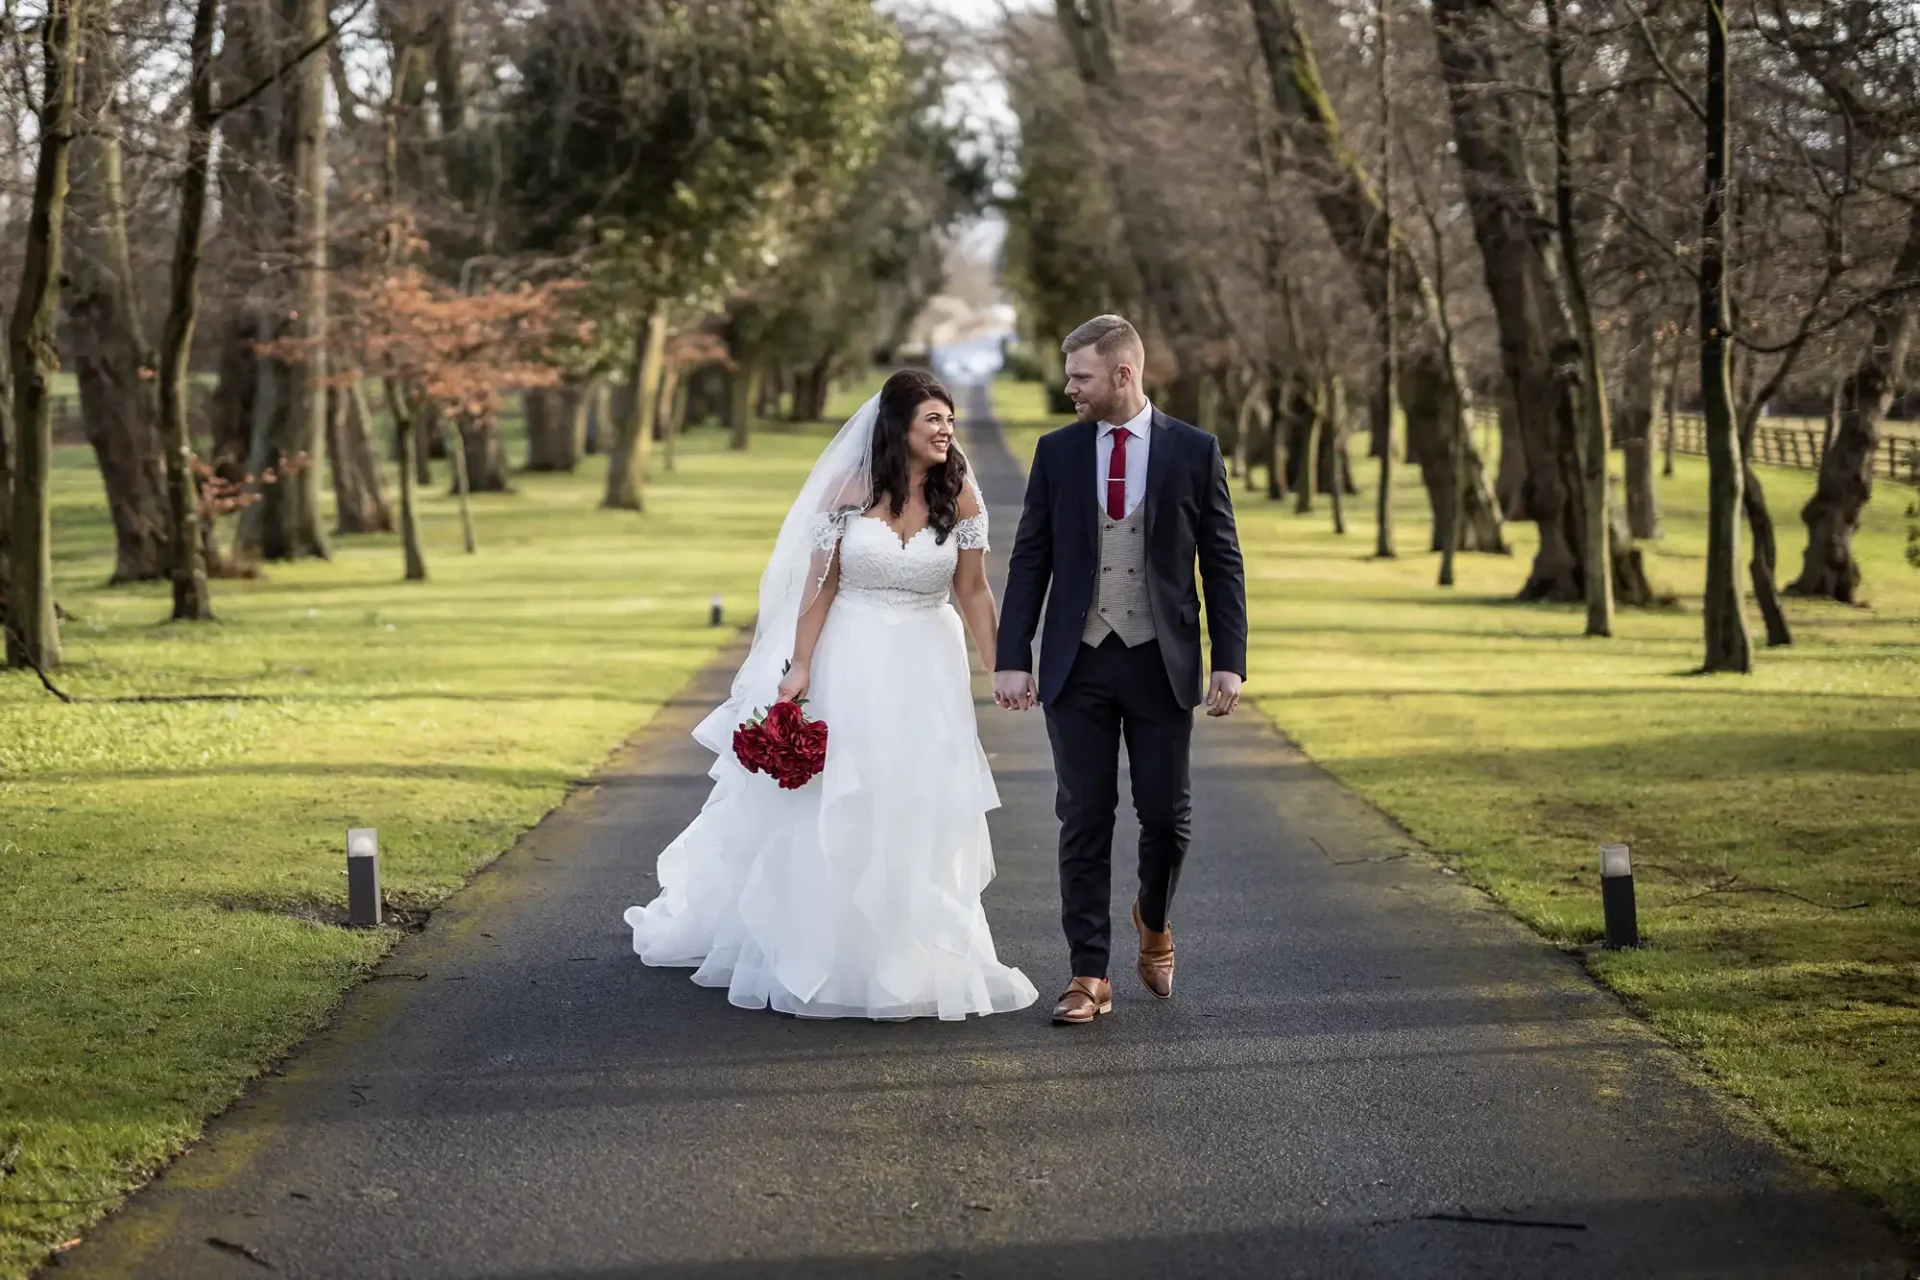 Bride in a white dress and groom in a suit holding hands while walking down a tree-lined park path.